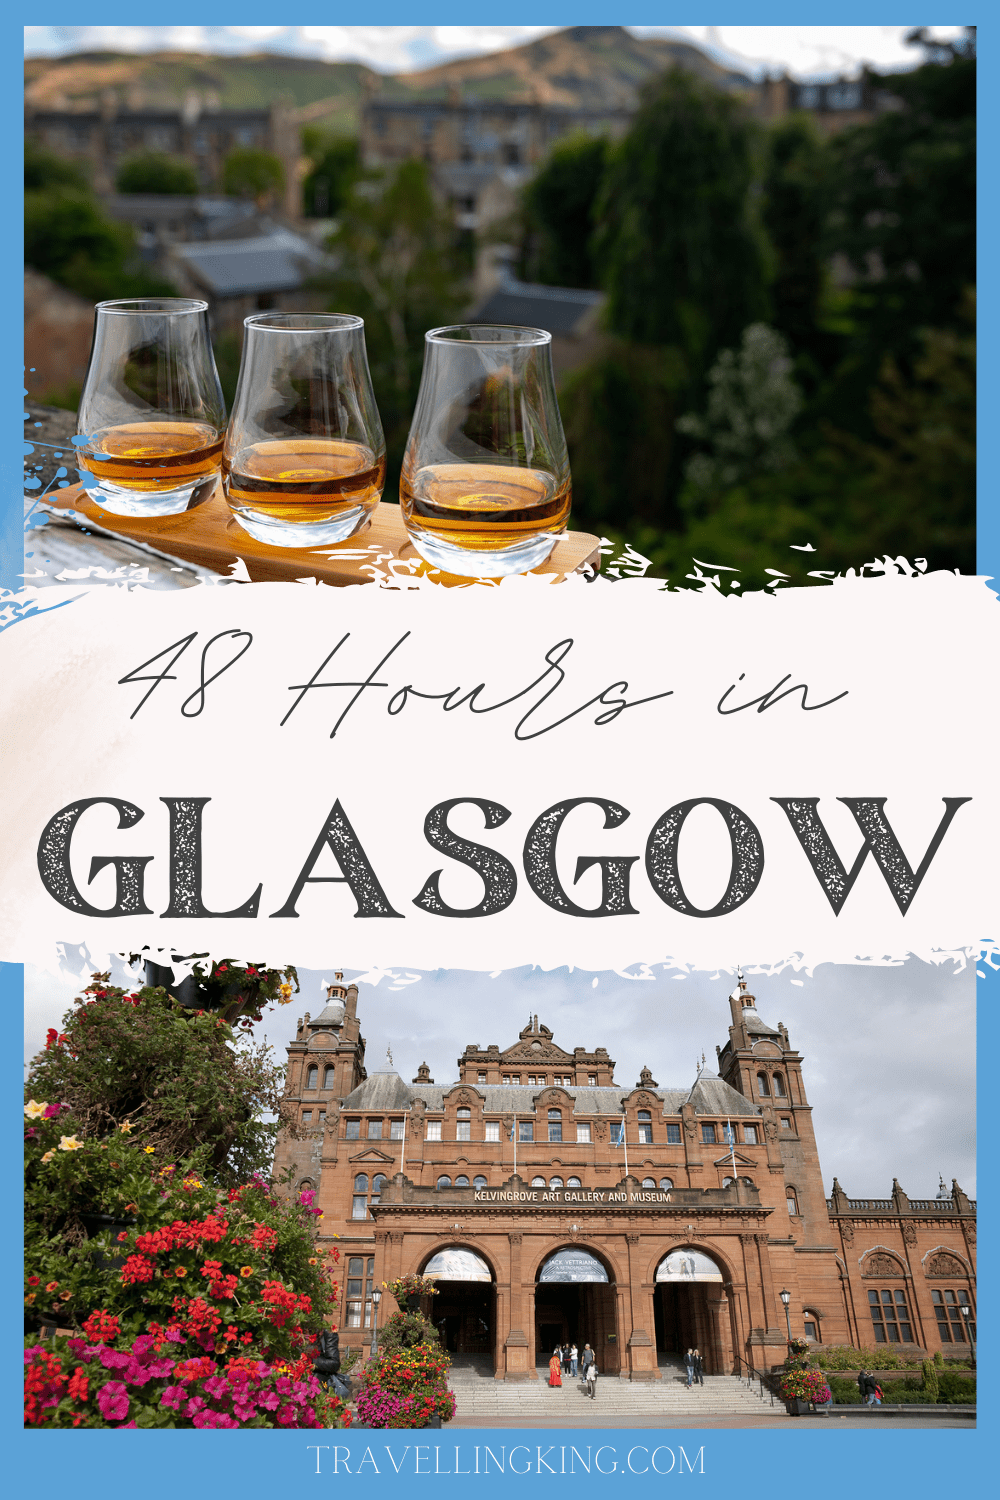 48 Hours in Glasgow - A 2 Day Itinerary